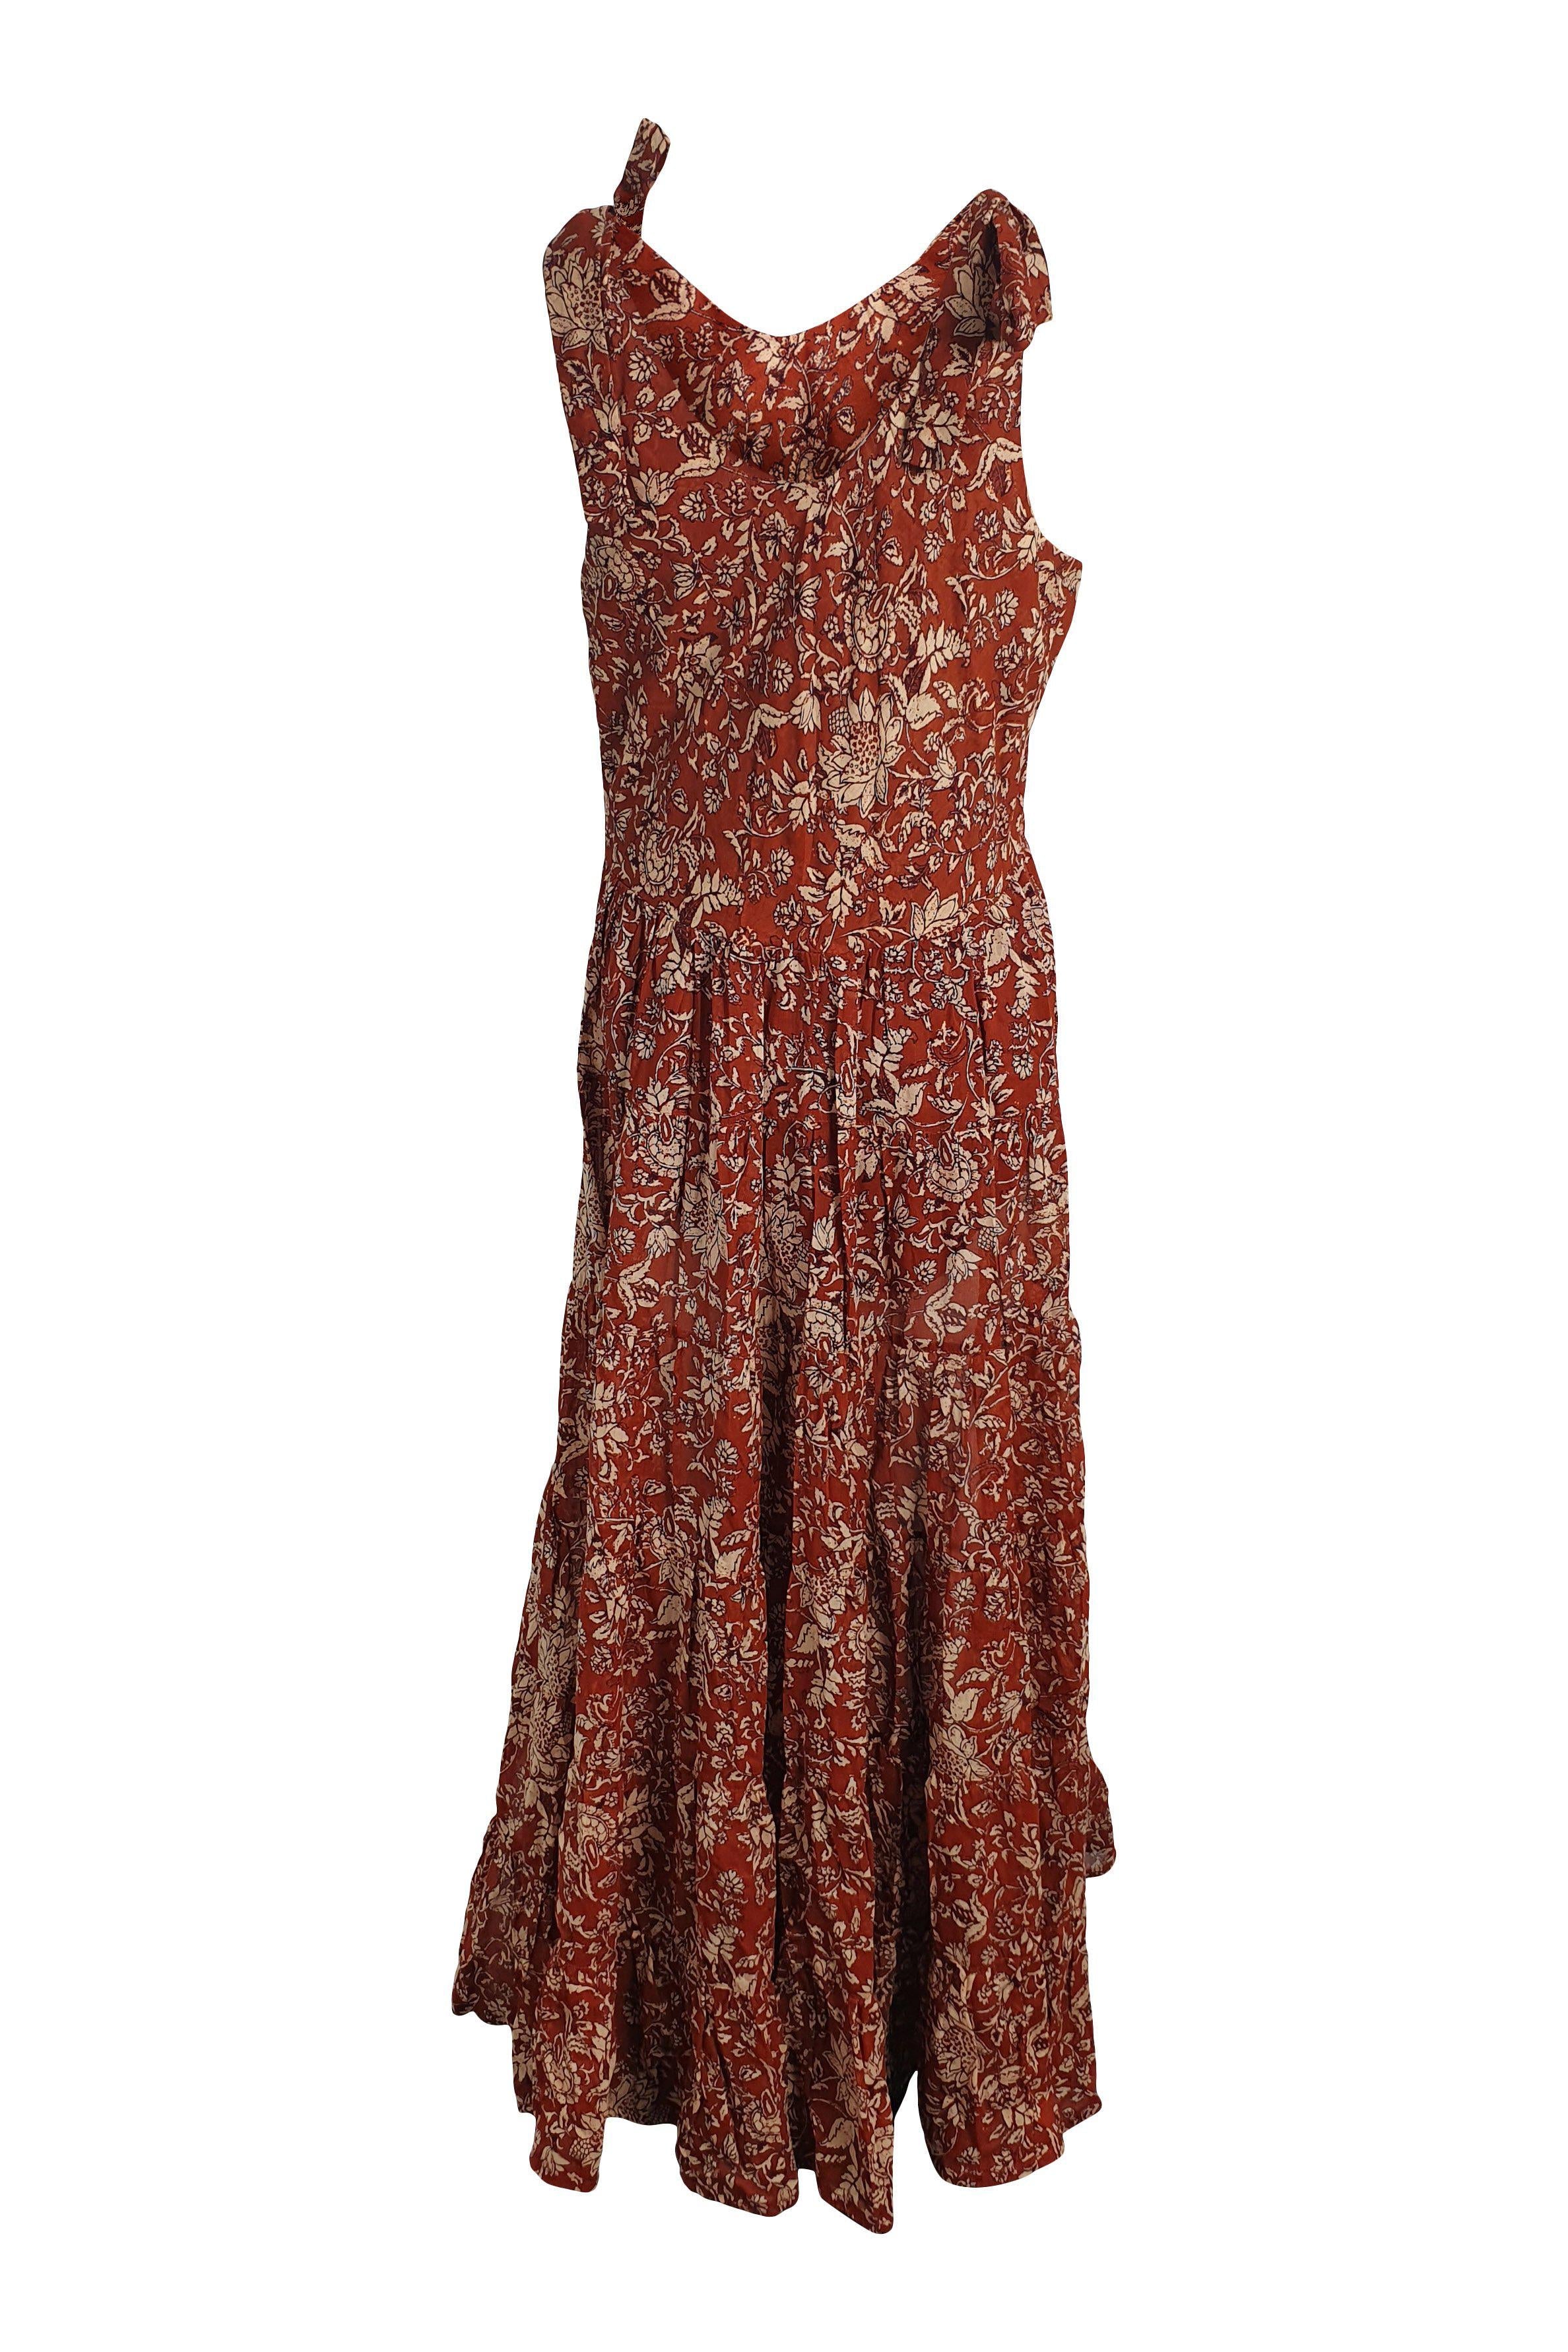 FREE PEOPLE 100% Cotton Brown Motif Floral Print Midi Dress (M)-Free People-The Freperie